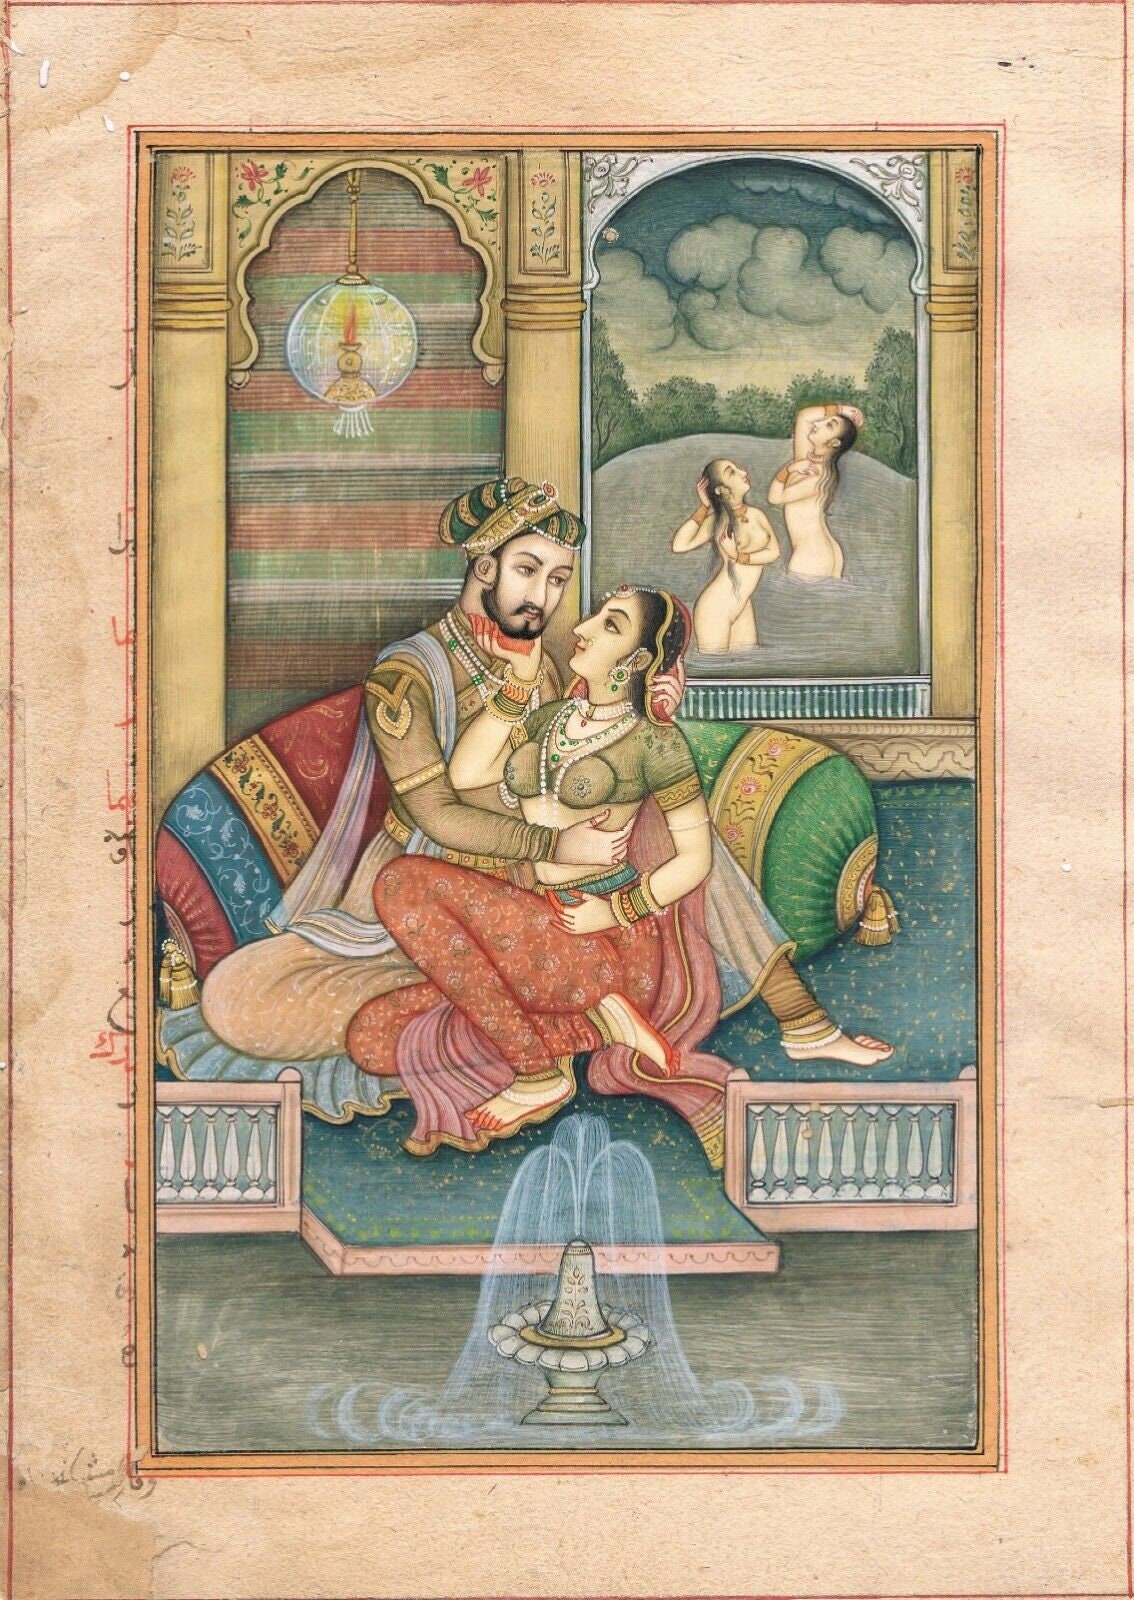 Indian Miniature Painting of Mughal Emperor Akbar and Jodha - Etsy